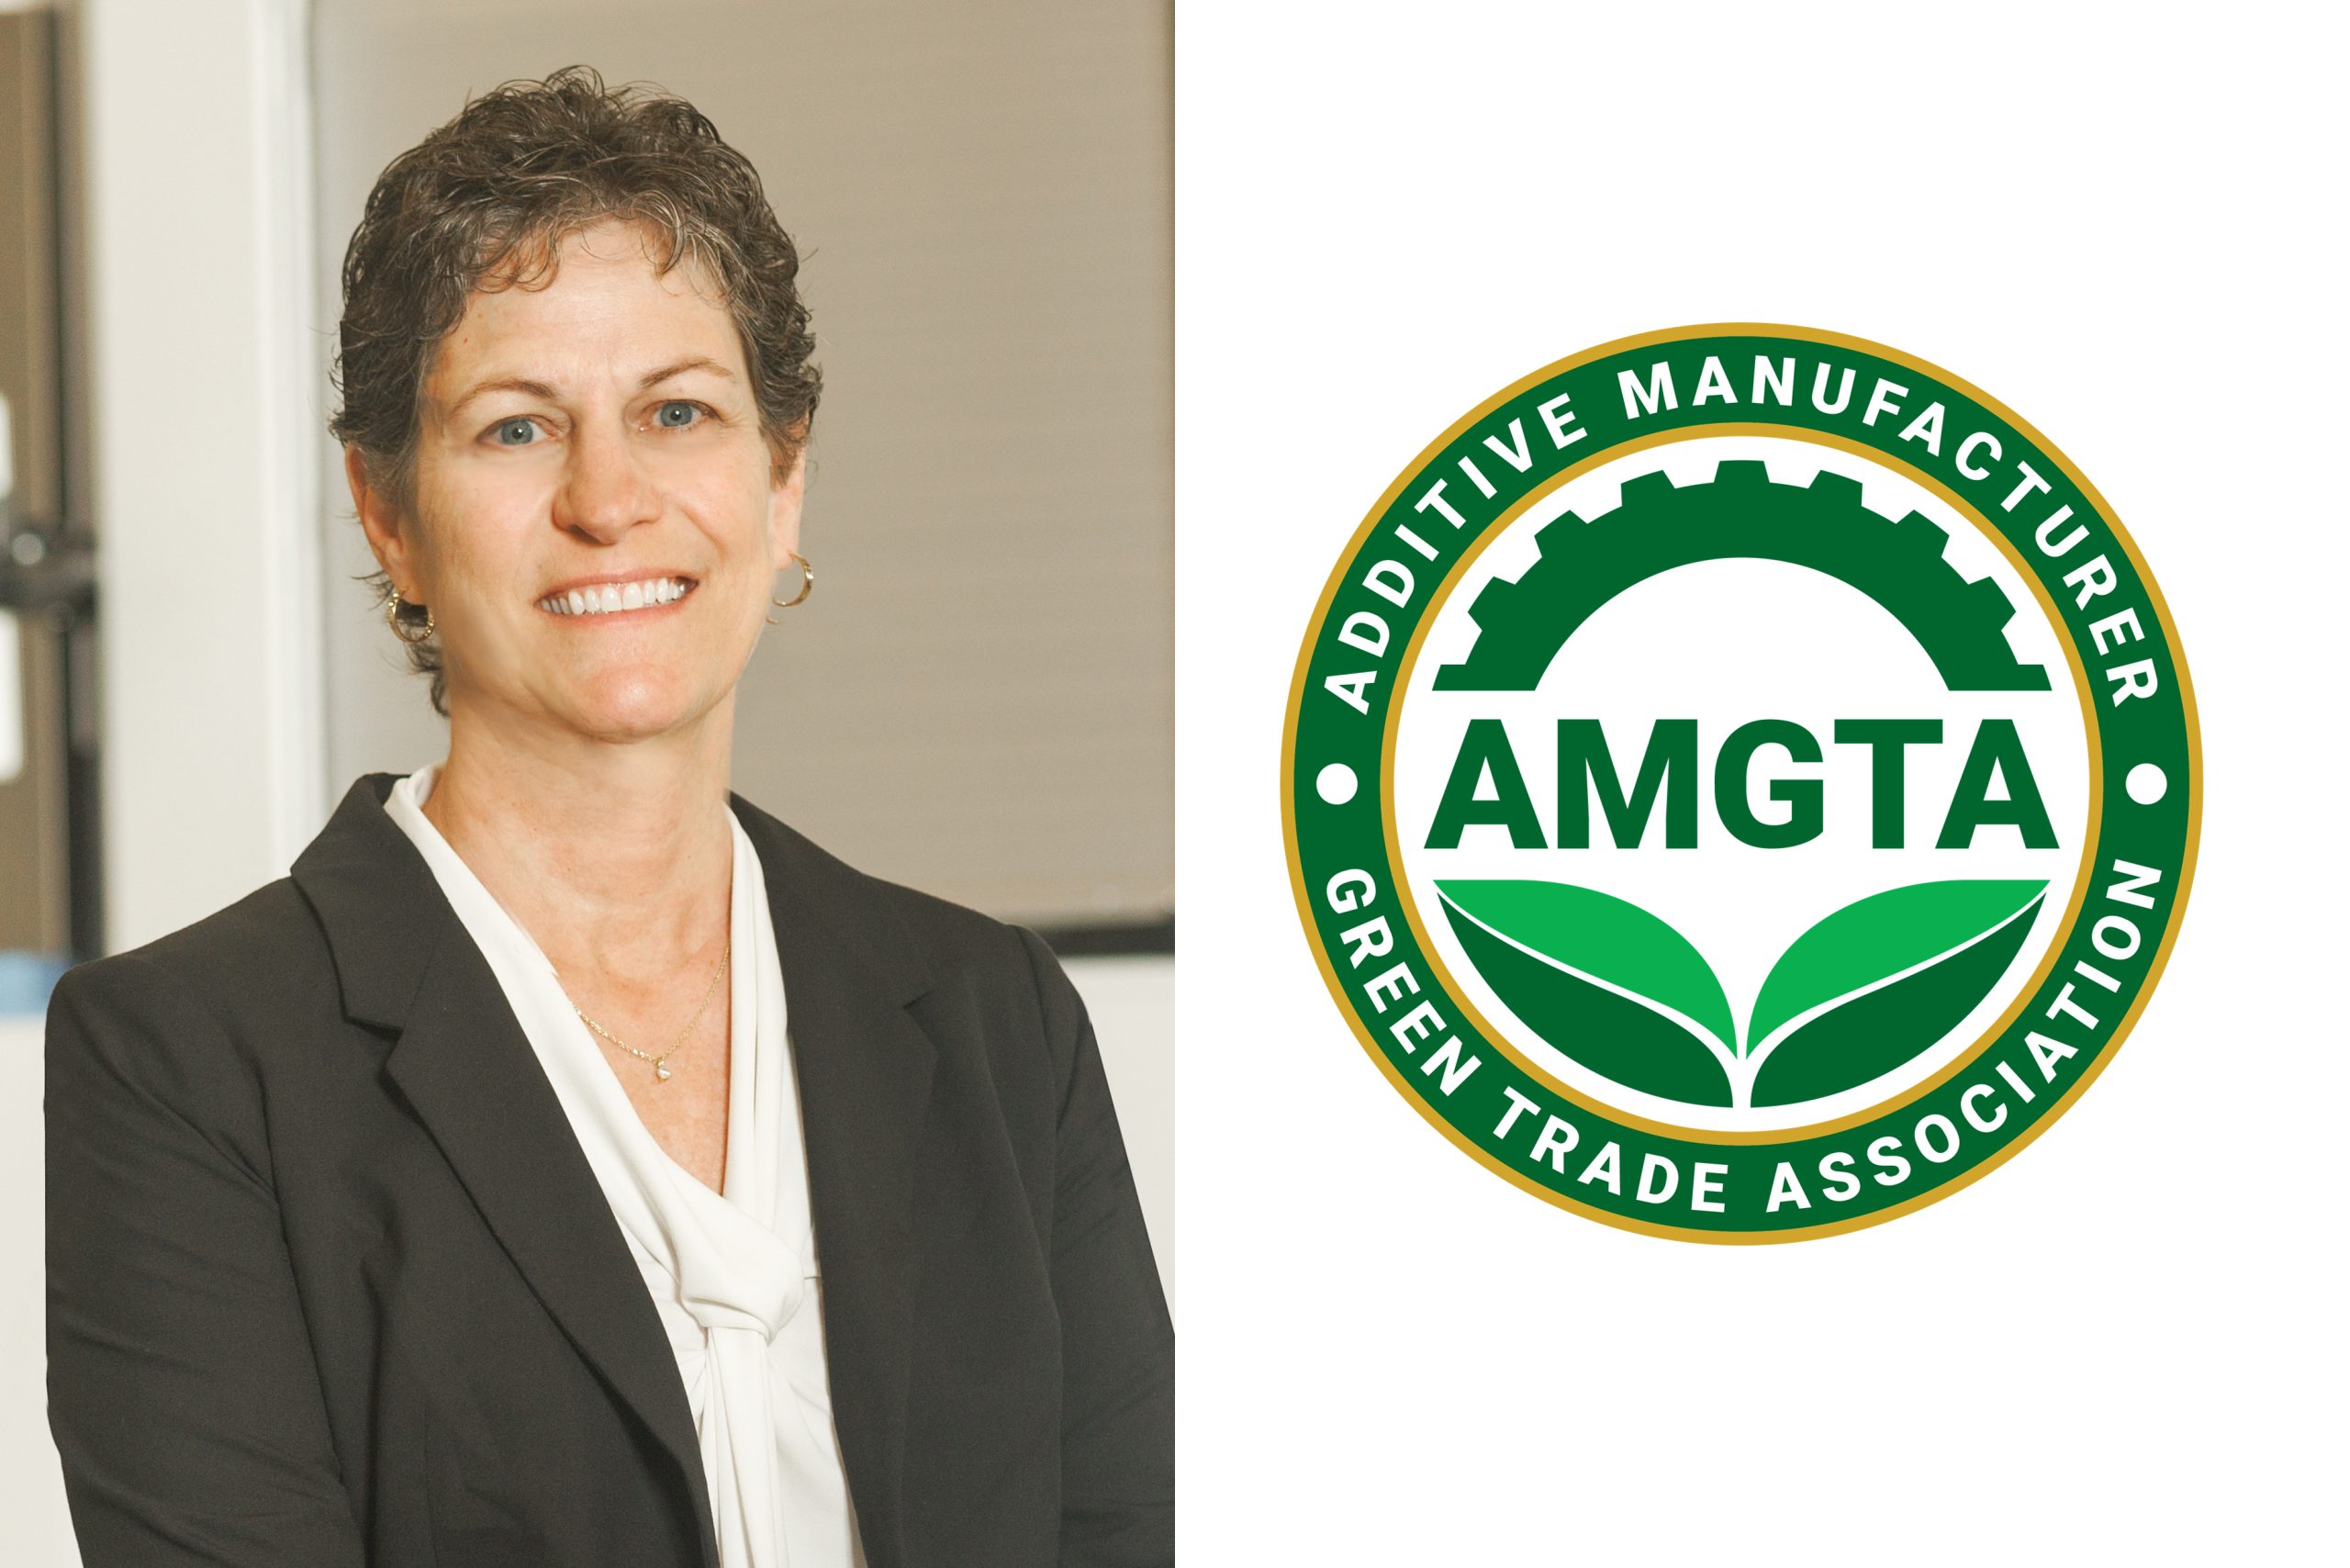 Sherri Monroe has been appointed Executive Director of the AMGTA. Photo via Business Wire.